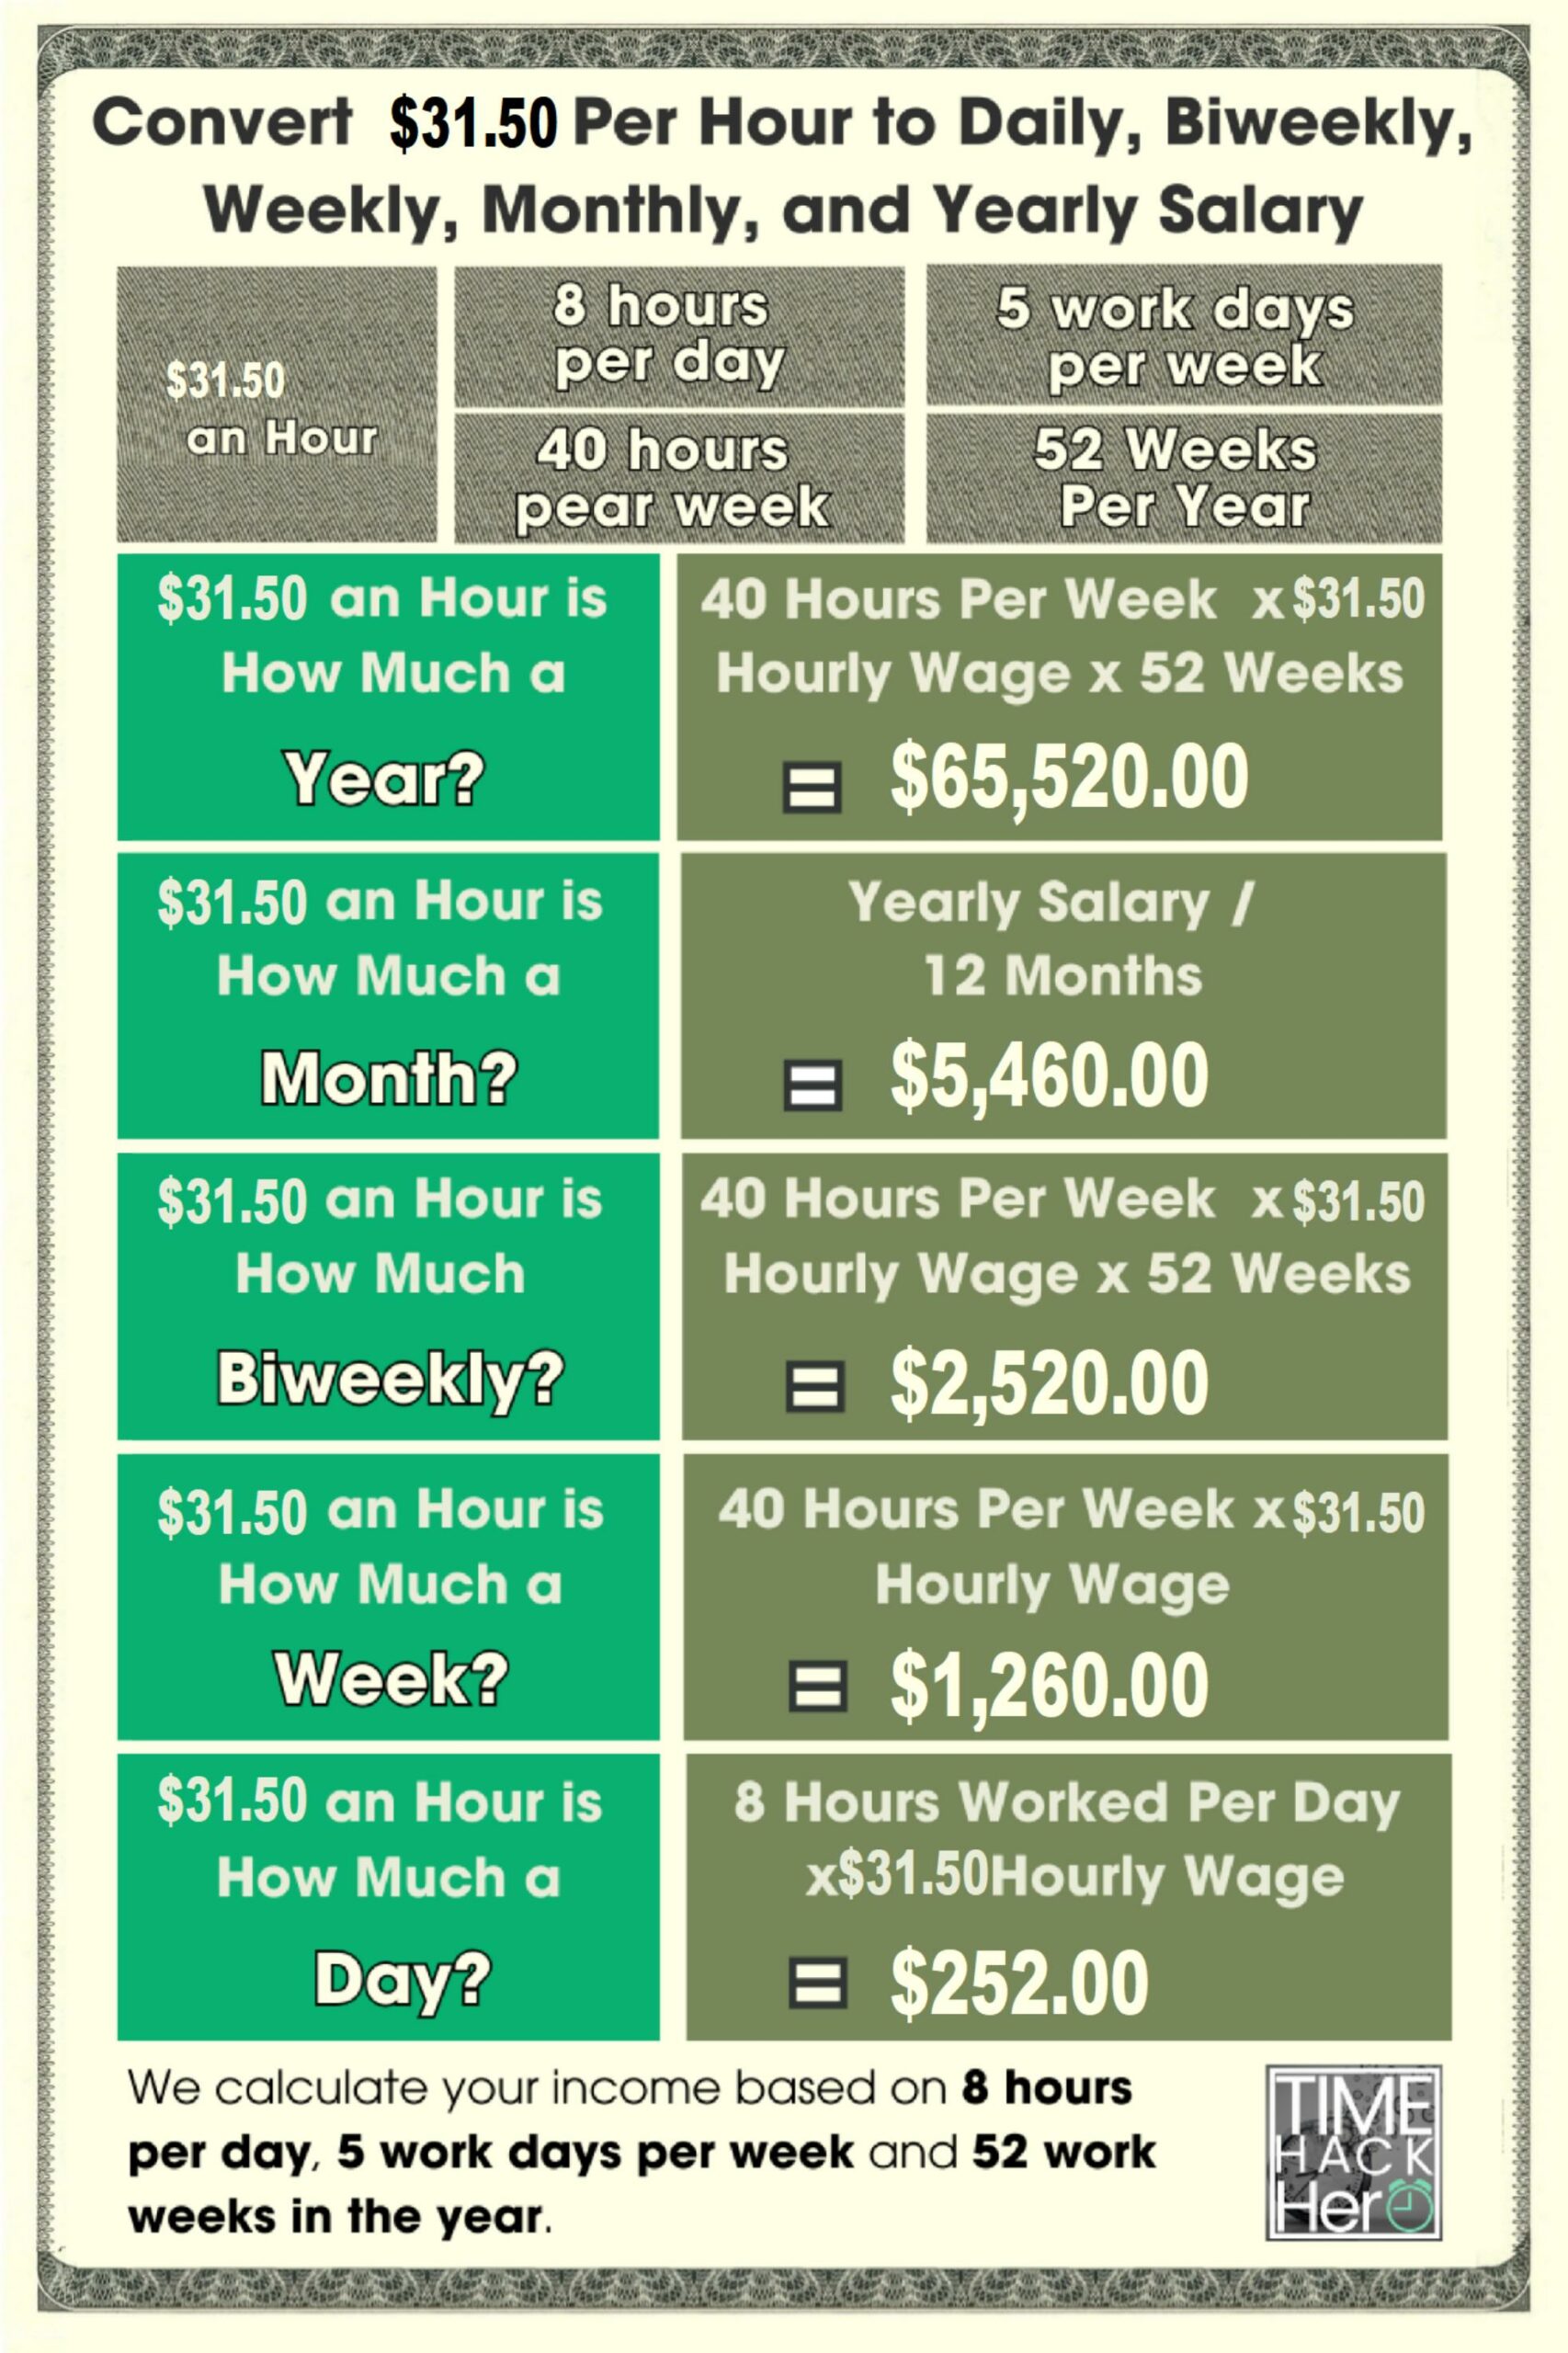 Convert $31.5 Per Hour to Weekly, Monthly, and Yearly Salary